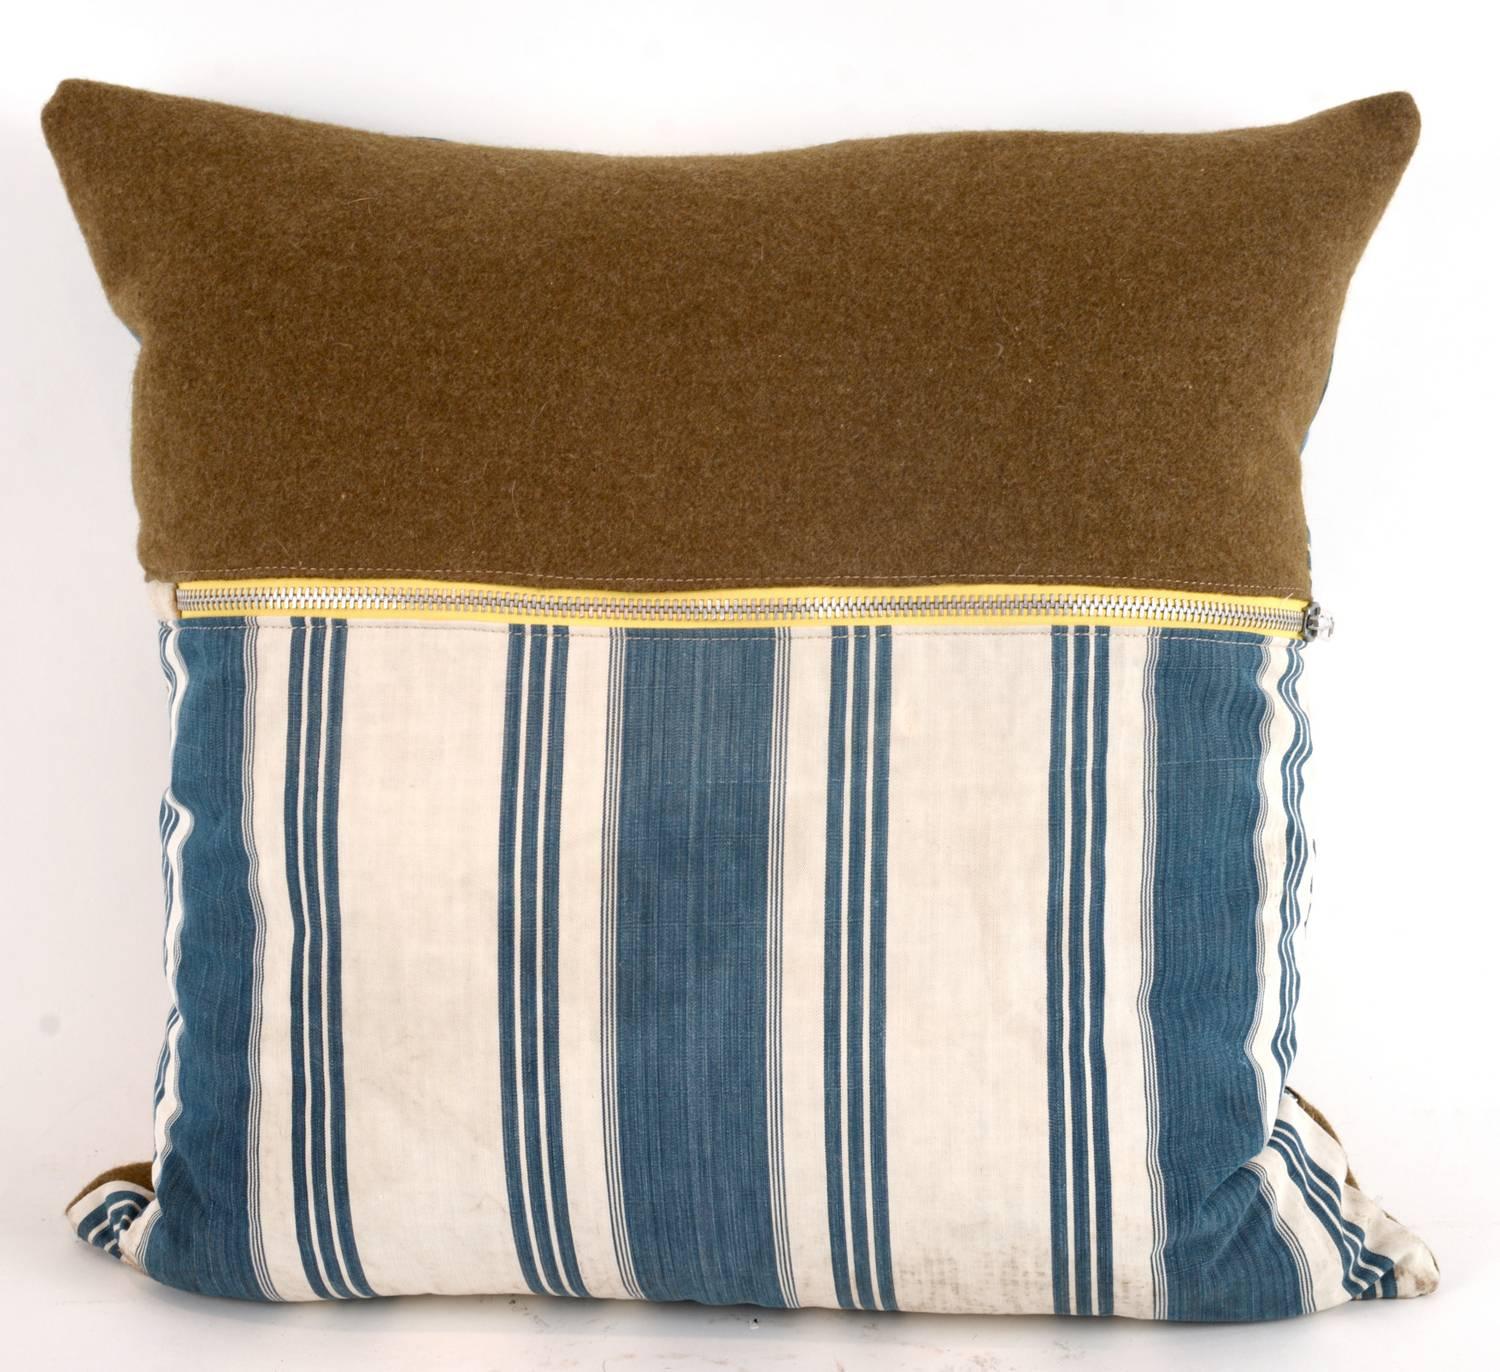 These pillows have a perfectly relaxed look including expected wear and tear to the vintage material. This is intentional and we believe it adds to the beauty and unique character of pillow.


   